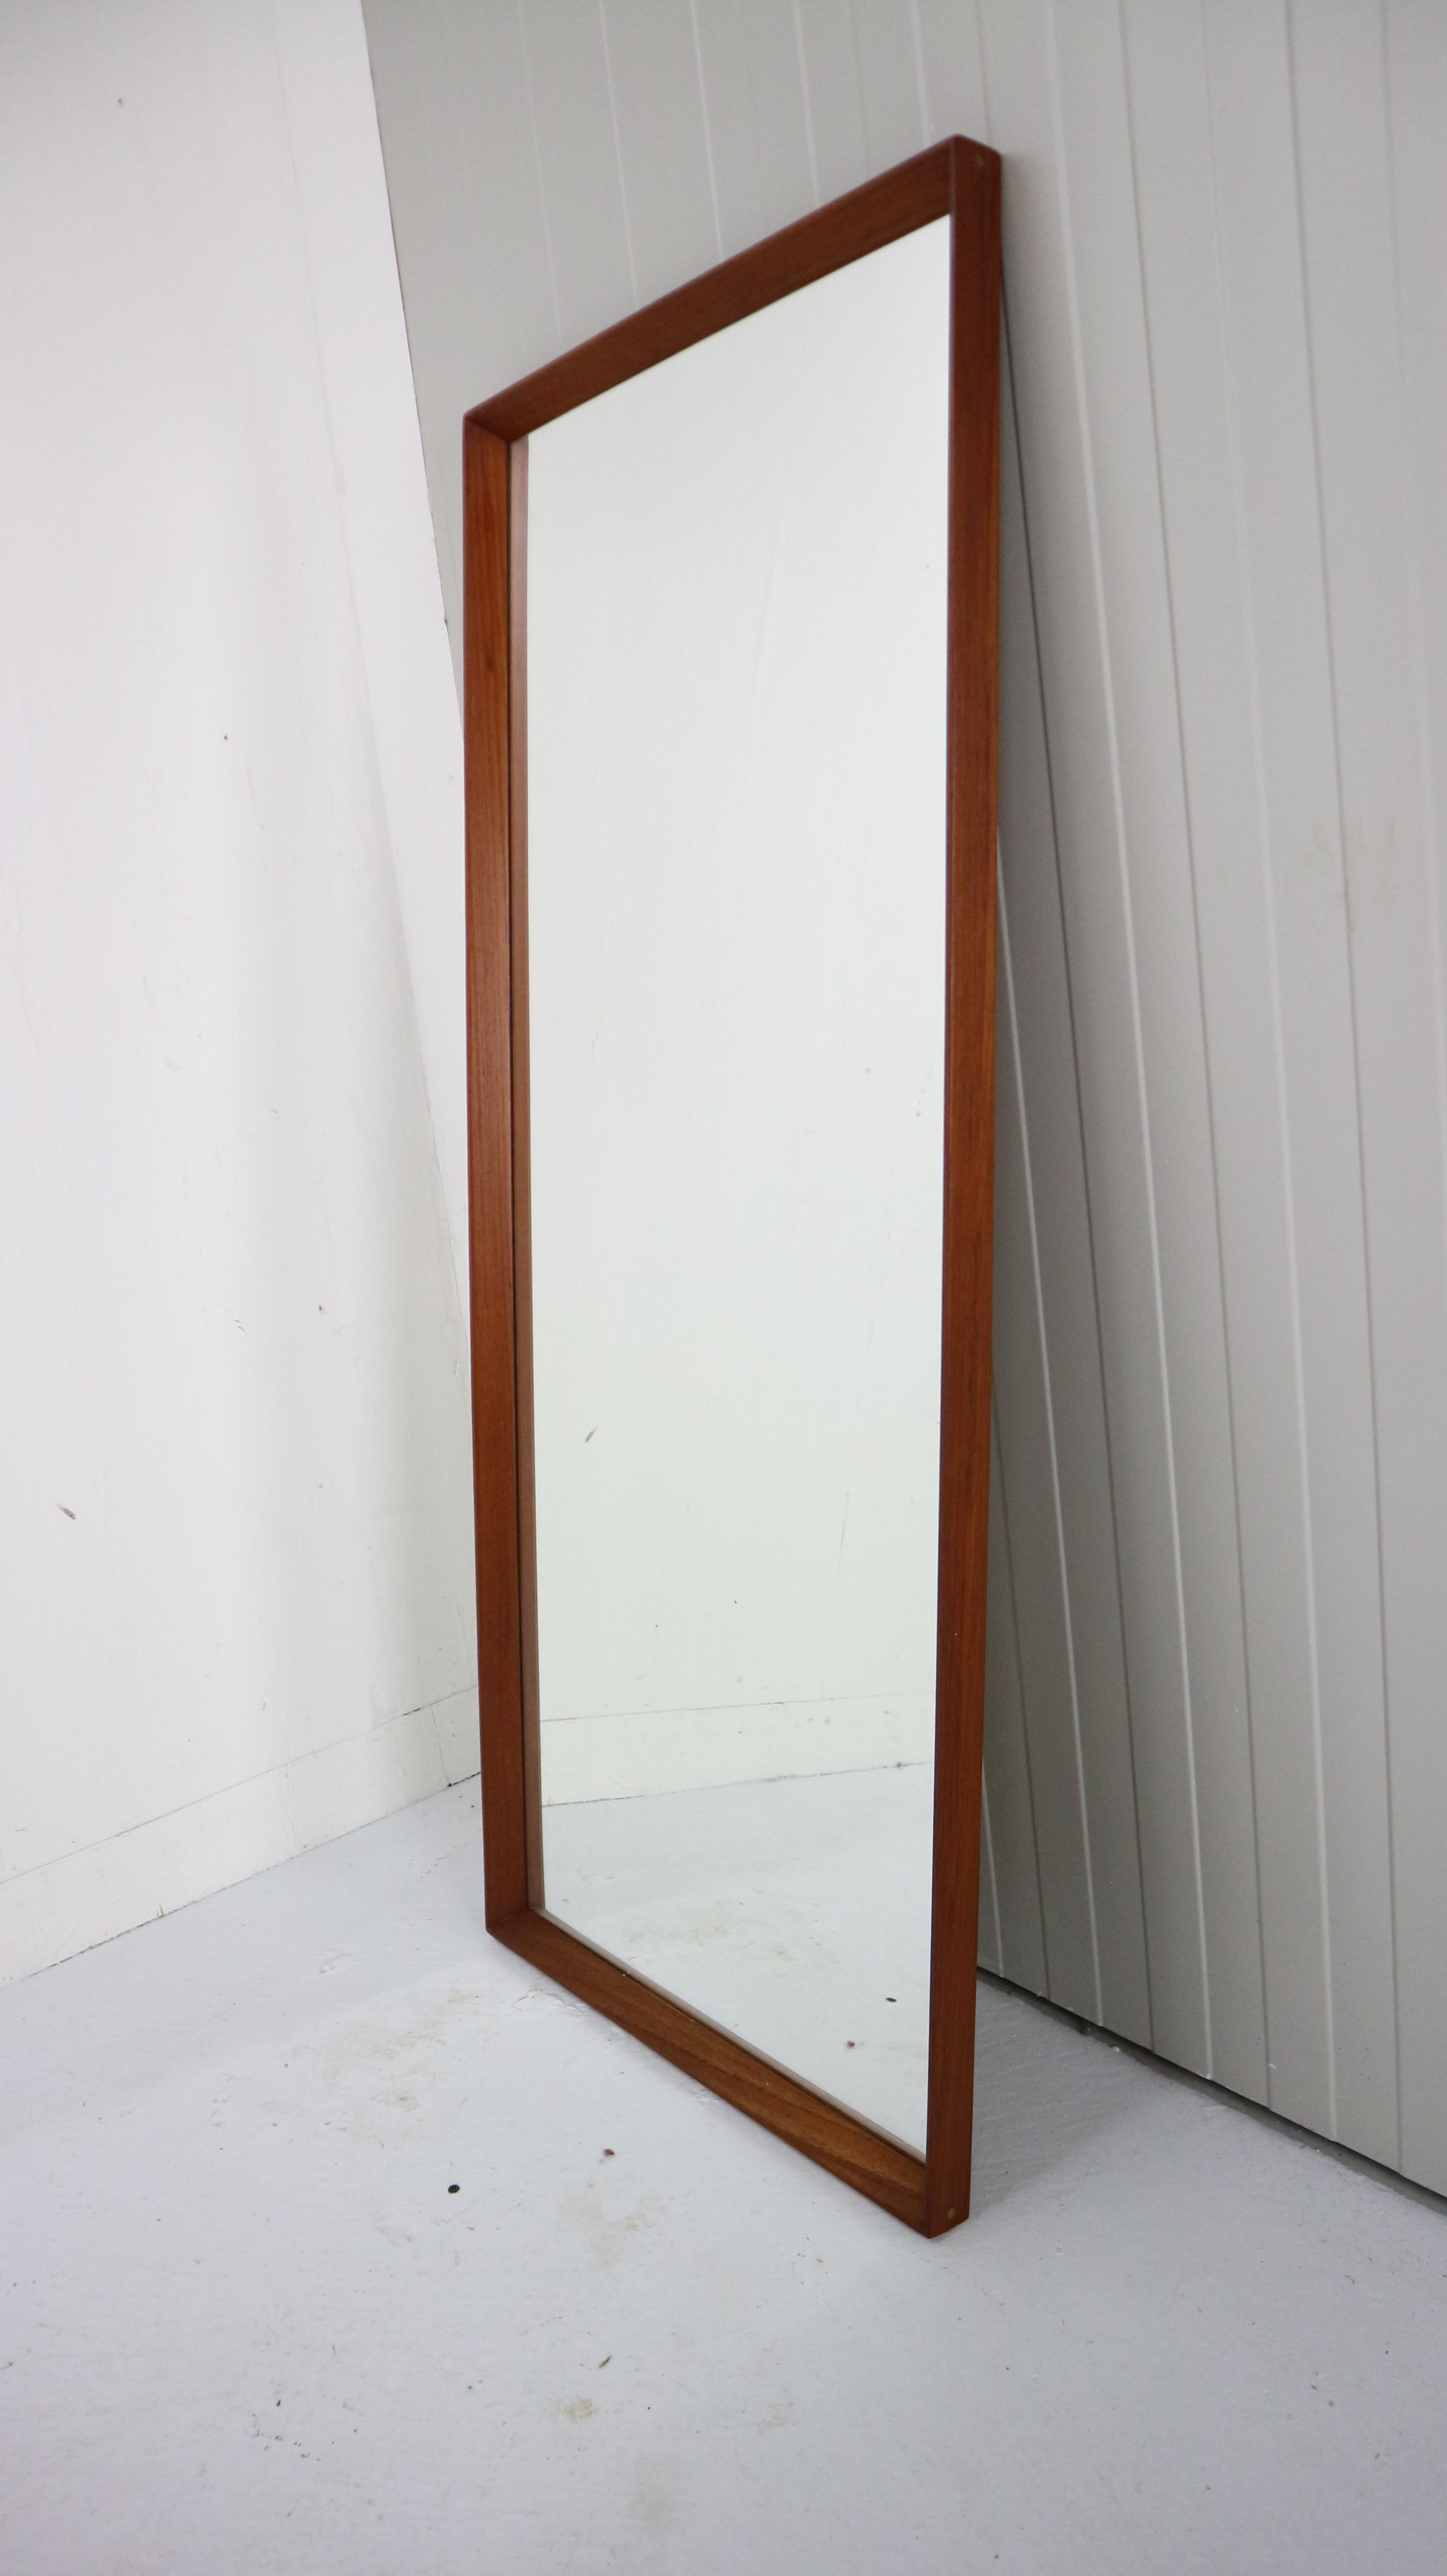 Beautiful Scandinavian Modern period wall mirror made in 1950s period, Denmark.
A solid teak frame is showcased by a beveled edge. In excellent original condition.
     